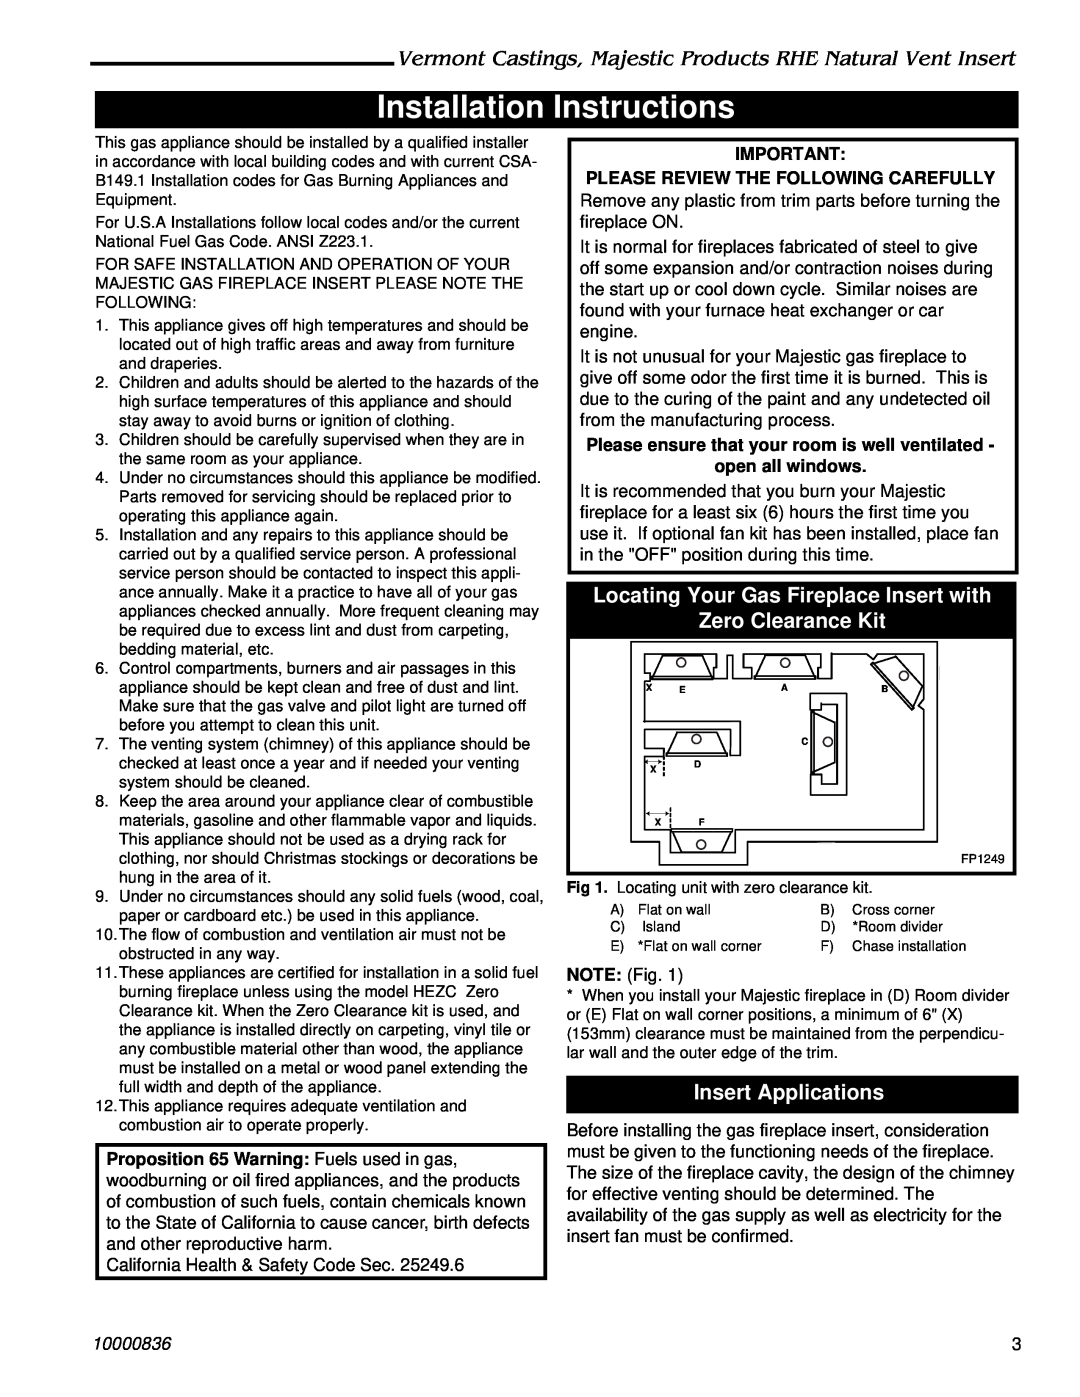 Vermont Casting RHE42 Installation Instructions, Locating Your Gas Fireplace Insert with, Zero Clearance Kit, 10000836 